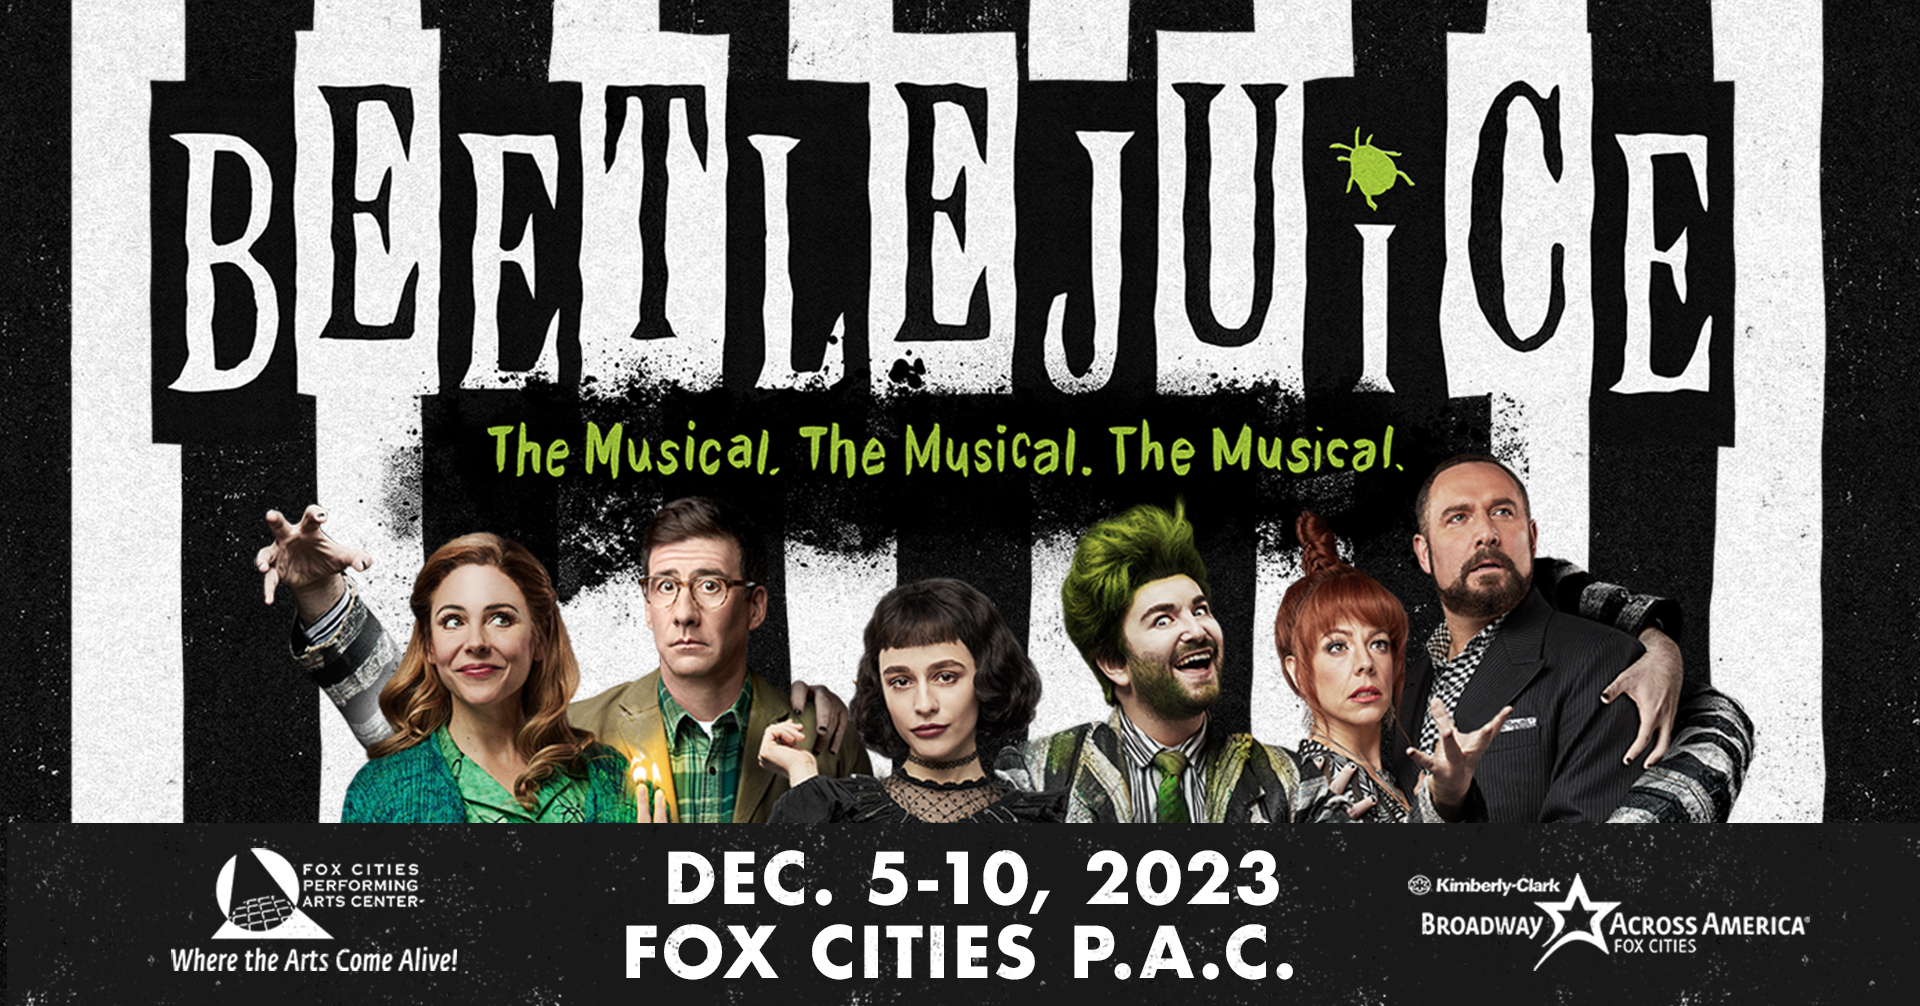 Beetlejuice The Musical Travel Wisconsin